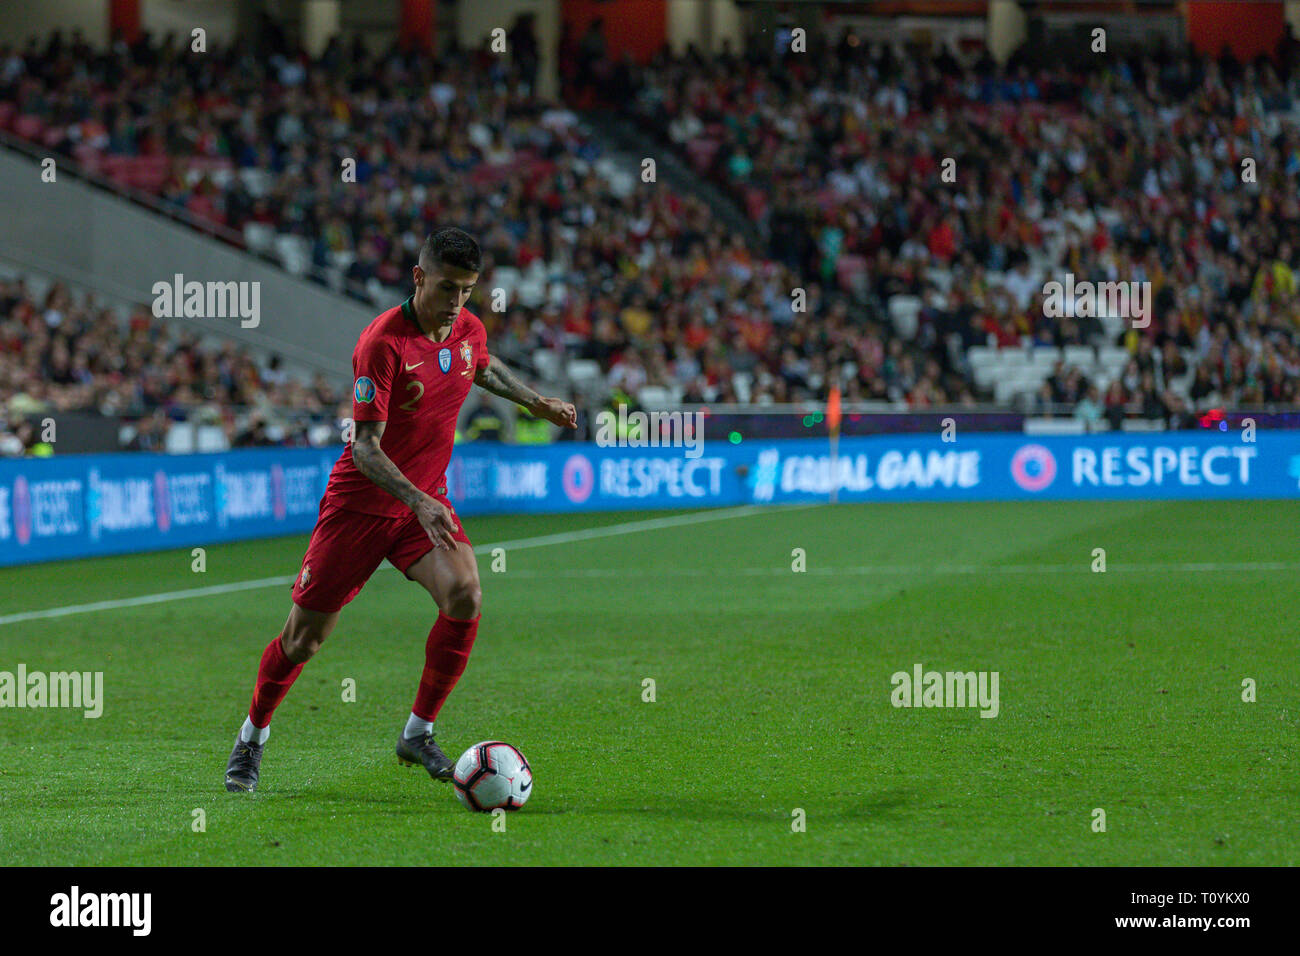 Lisbon, Portugal. 22nd Mar, 2019. March 22, 2019. Lisbon, Portugal. Portugal's and Juventus defender Joao Cancelo (2) during the European Championship 2020 Qualifying Round between Portugal and Ukraine © Alexandre de Sousa/Alamy Live News Stock Photo